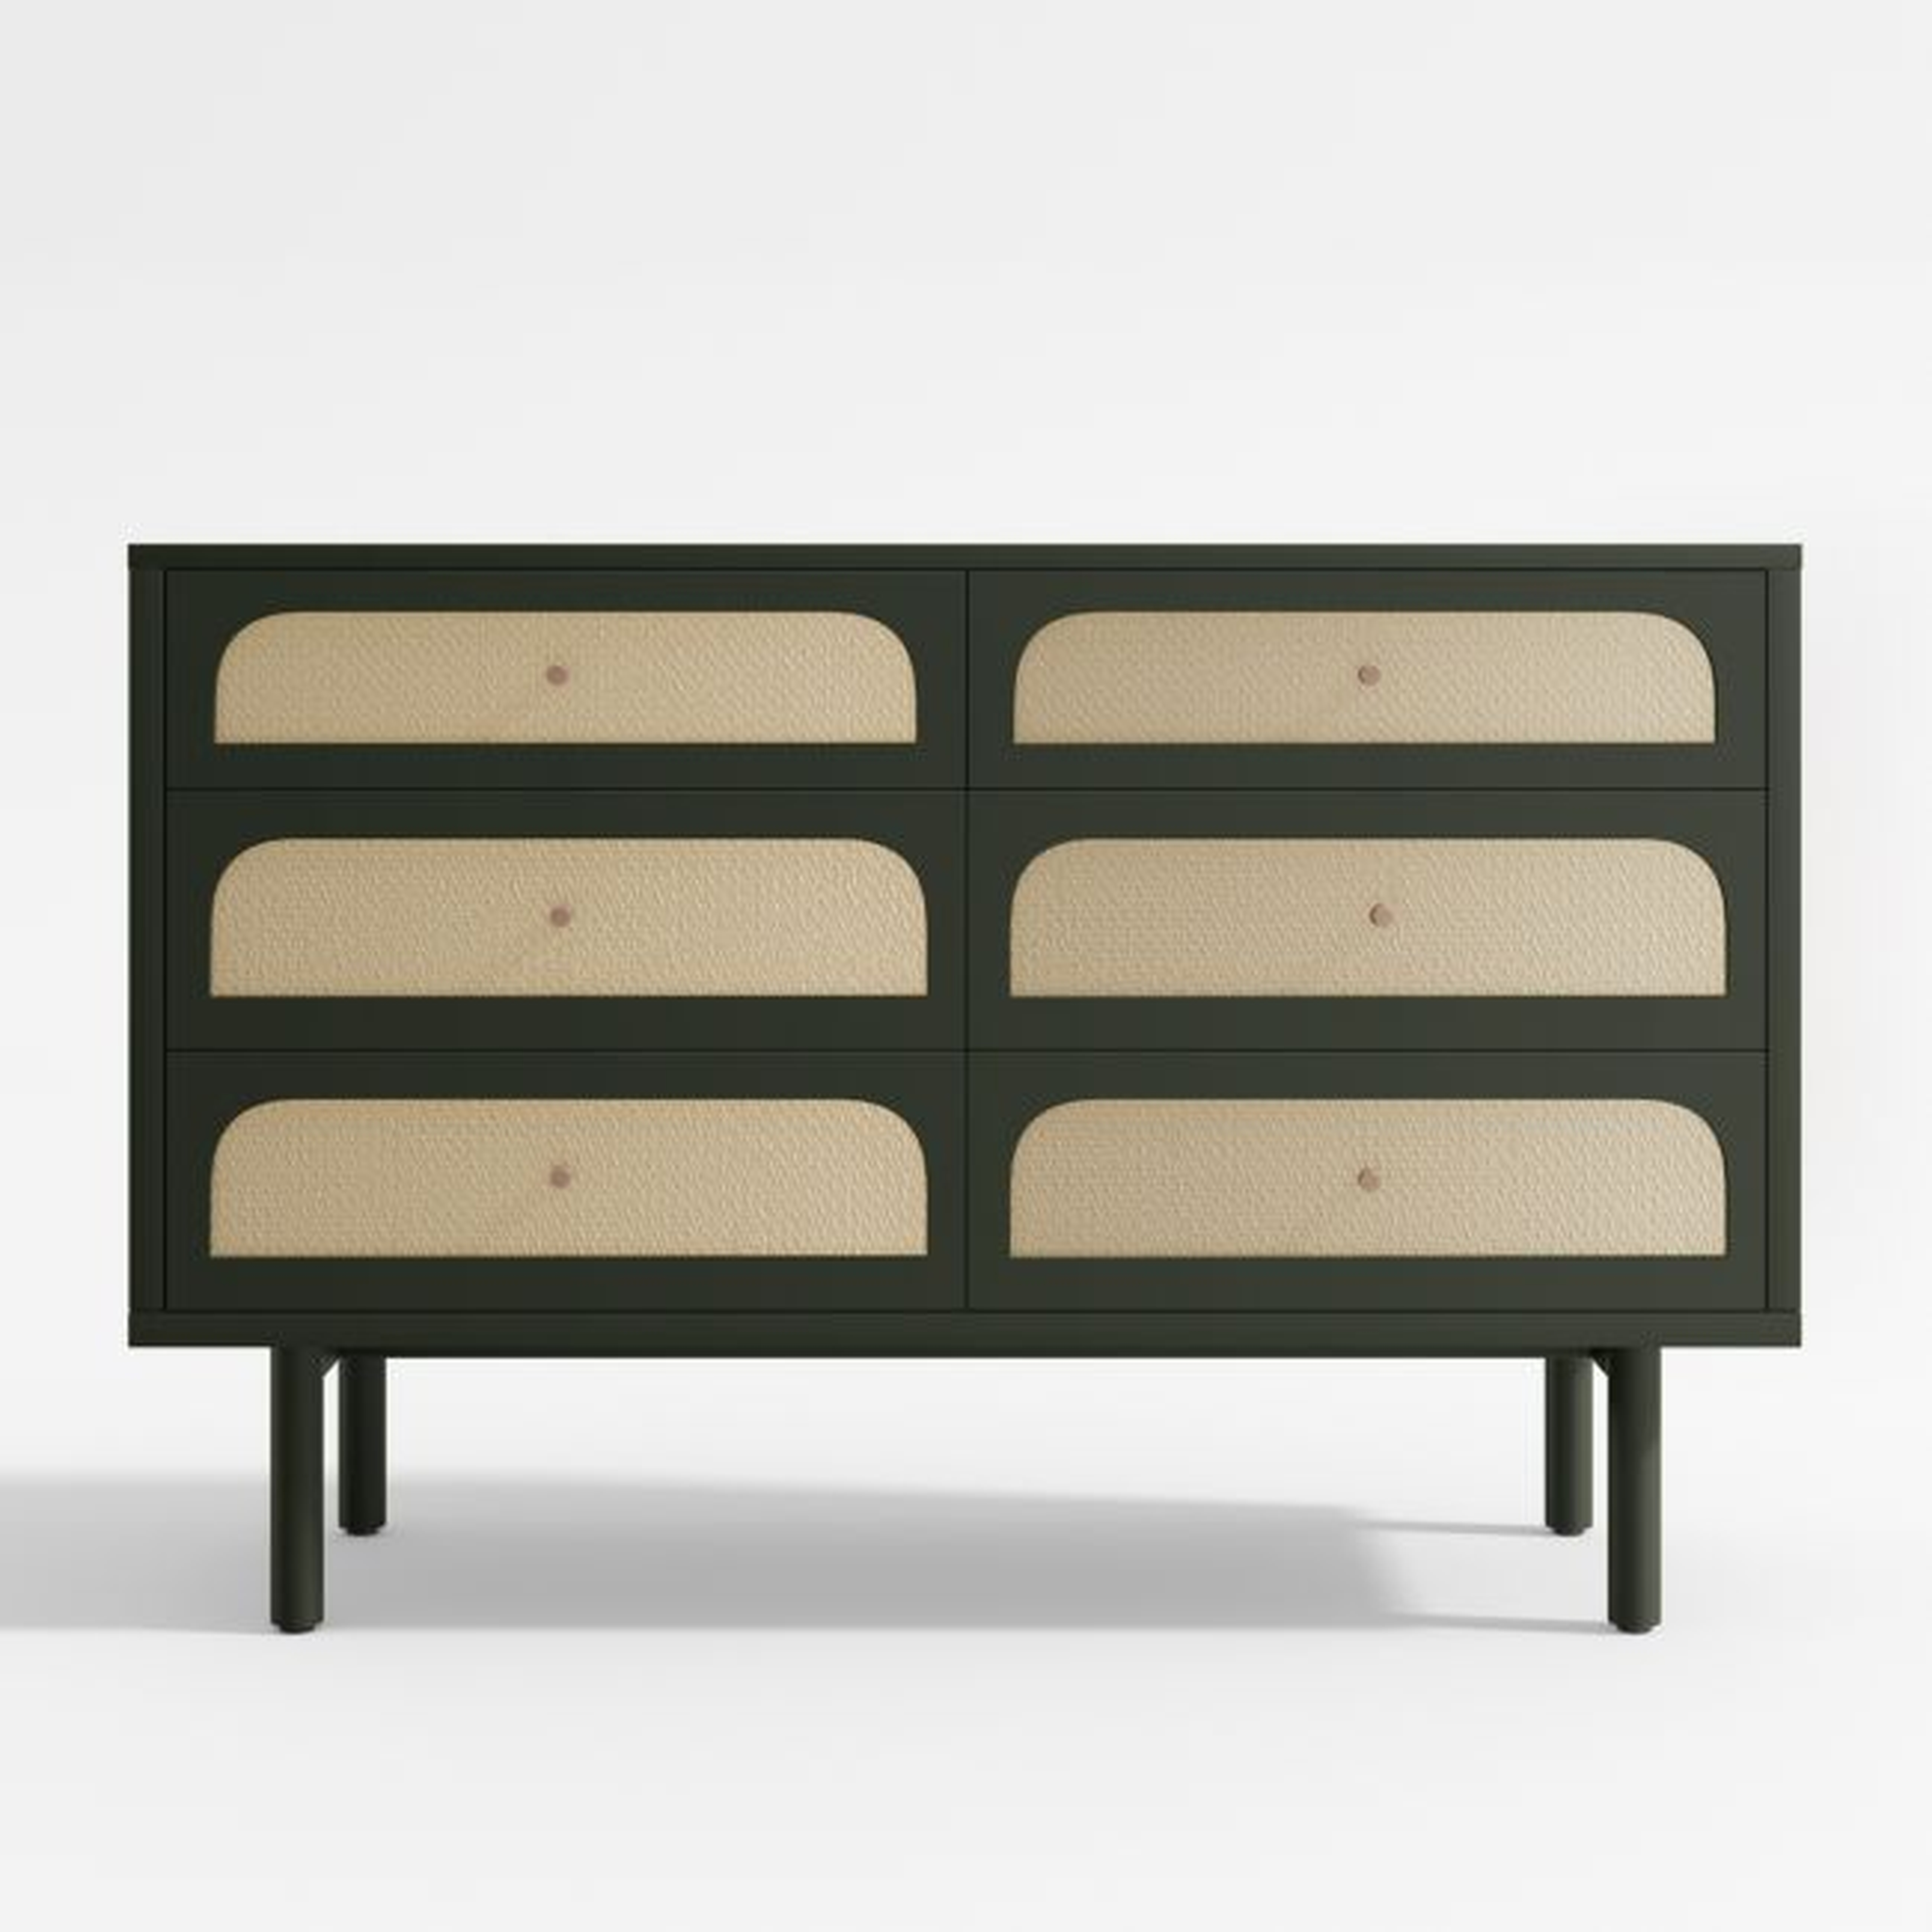 Maren Olive Green and Cane Wood 6-Drawer Dresser - Crate and Barrel